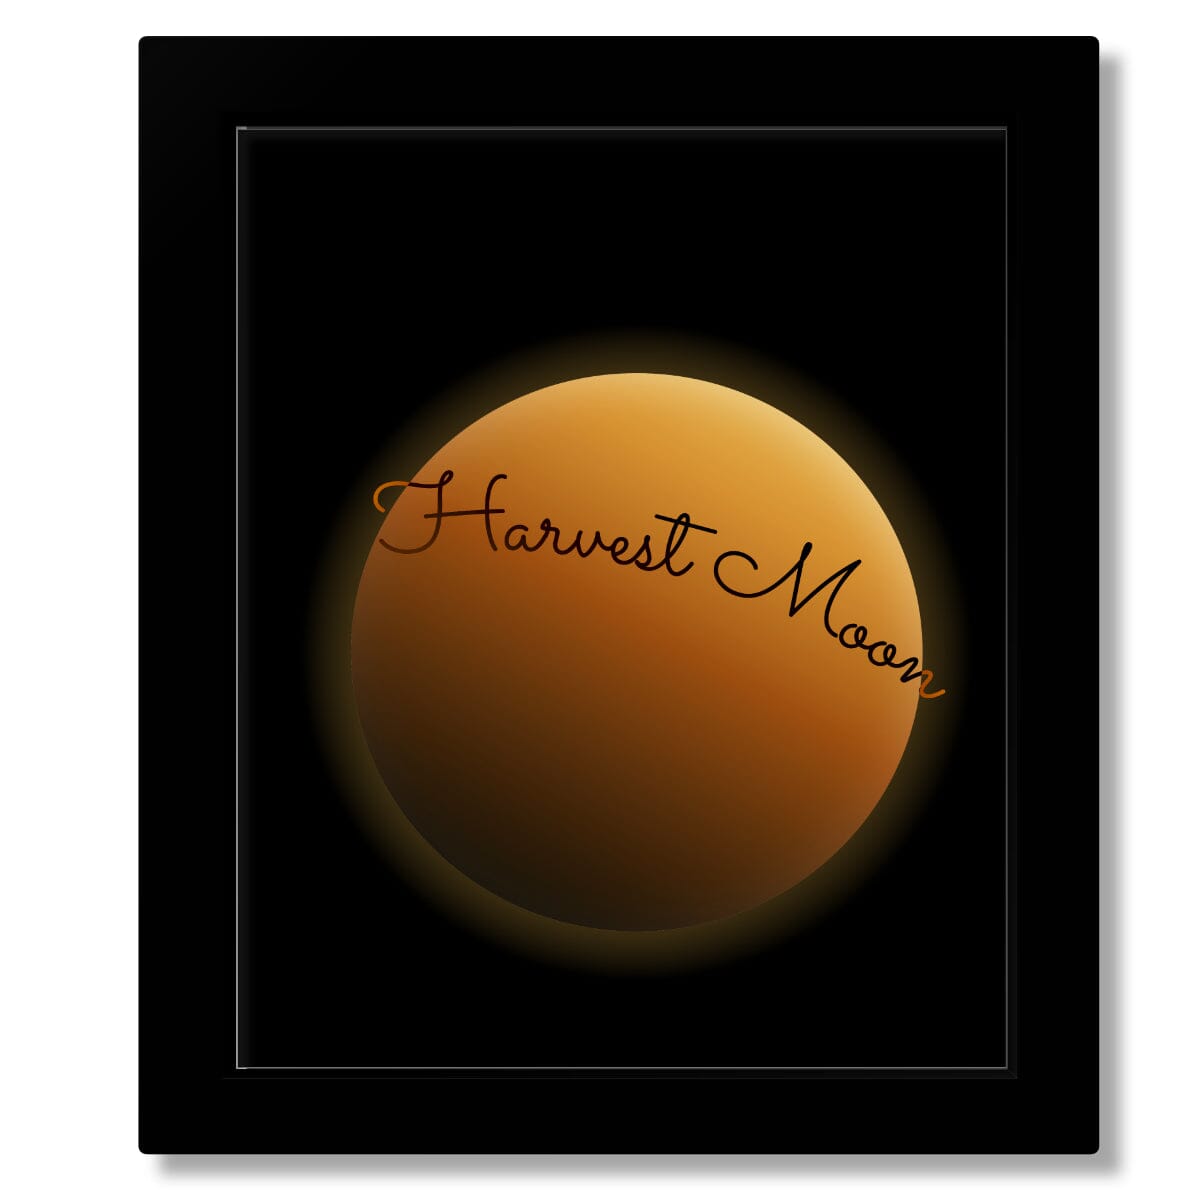 Harvest Moon by Neil Young - Music Song Lyric Print Artwork Song Lyrics Art Song Lyrics Art 8X10 Framed Print without Mat 